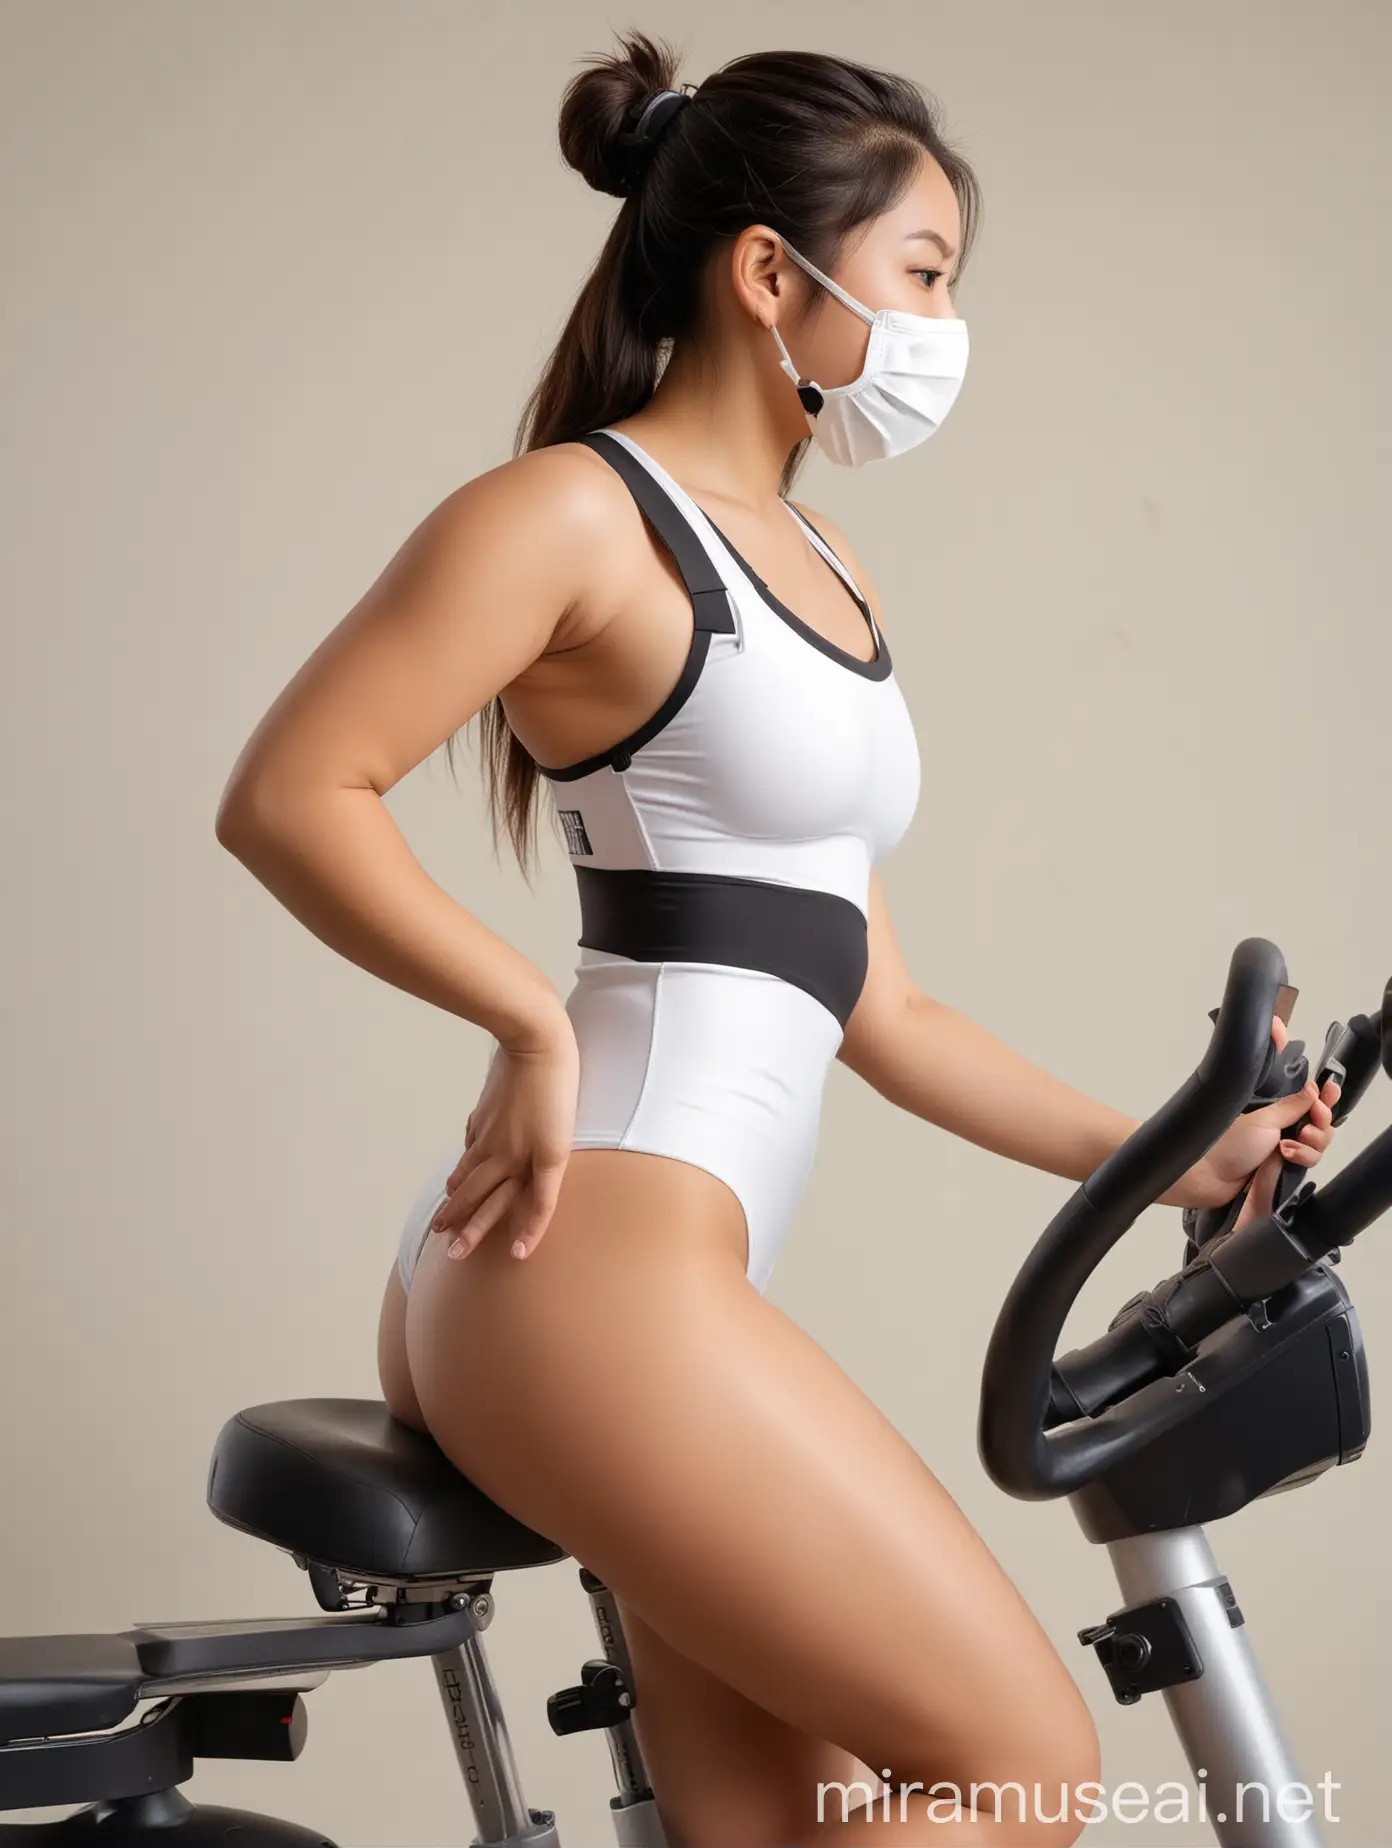 ChineseAmerican College Student Exercising in Sexy Sporty Swimsuit with Respirator Mask